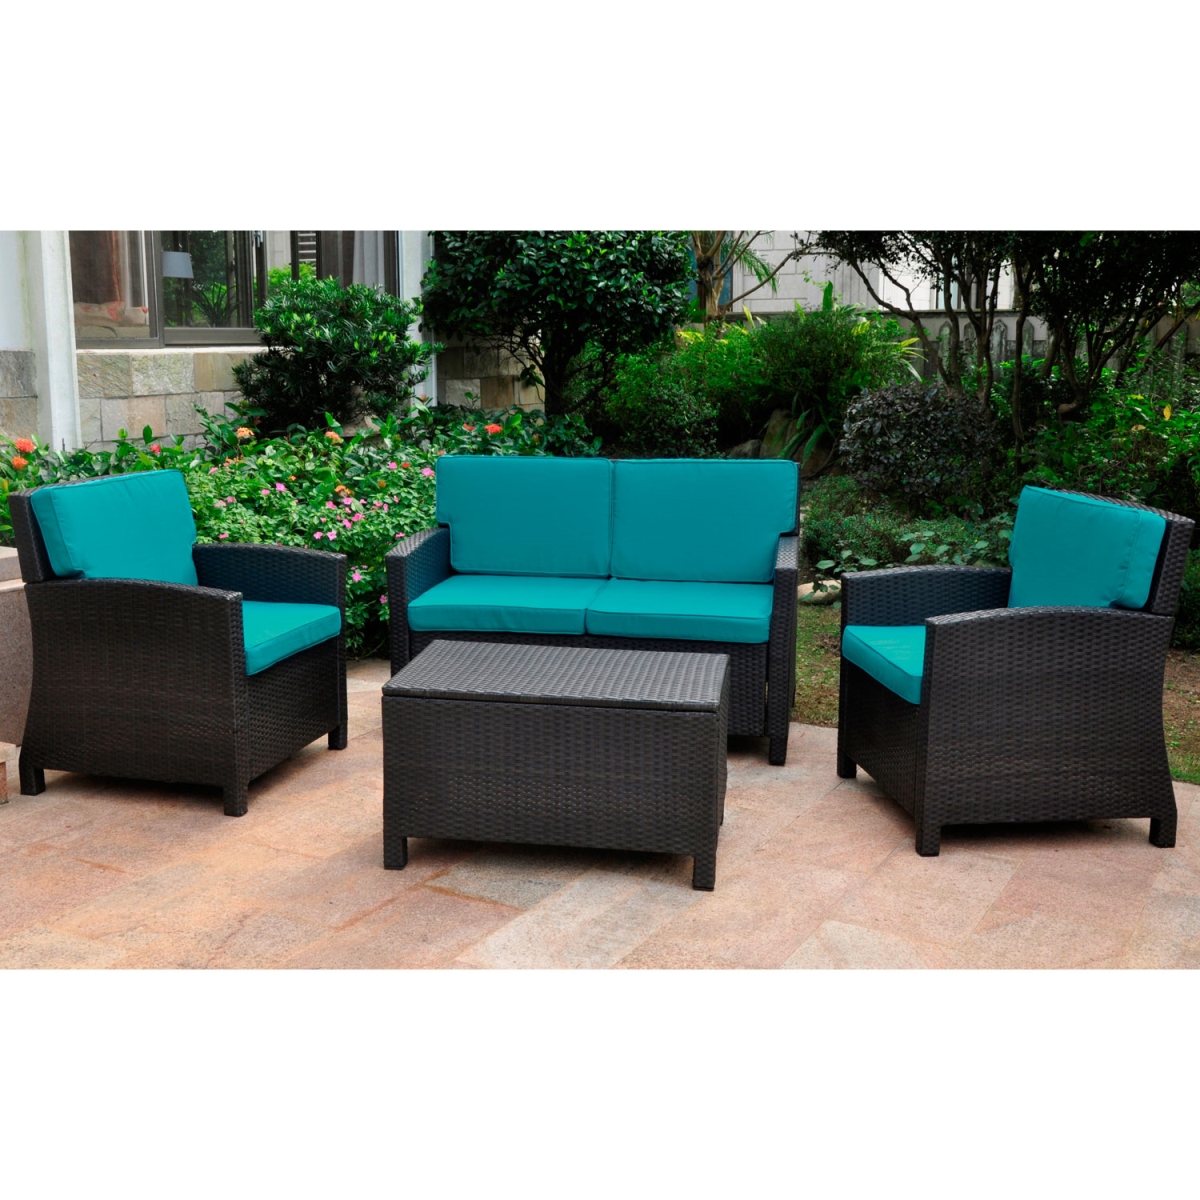 4140-s4-abk-ab Lisbon Resin Wicker & Steel Settee Group With Cushion, Black Antique - Set Of 4